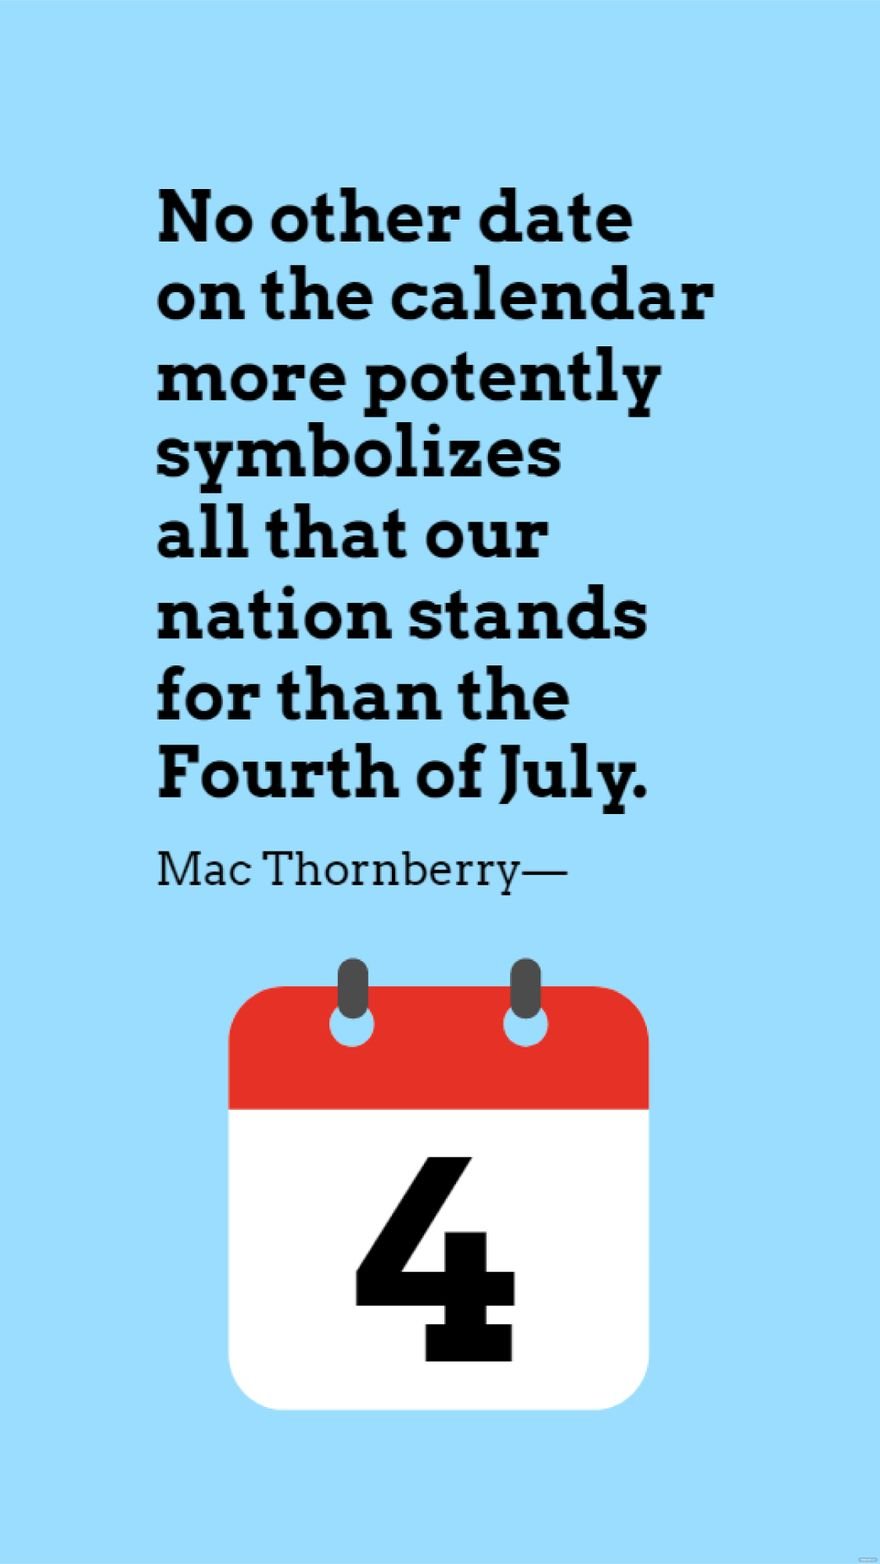 Mac Thornberry - No other date on the calendar more potently symbolizes all that our nation stands for than the Fourth of July.